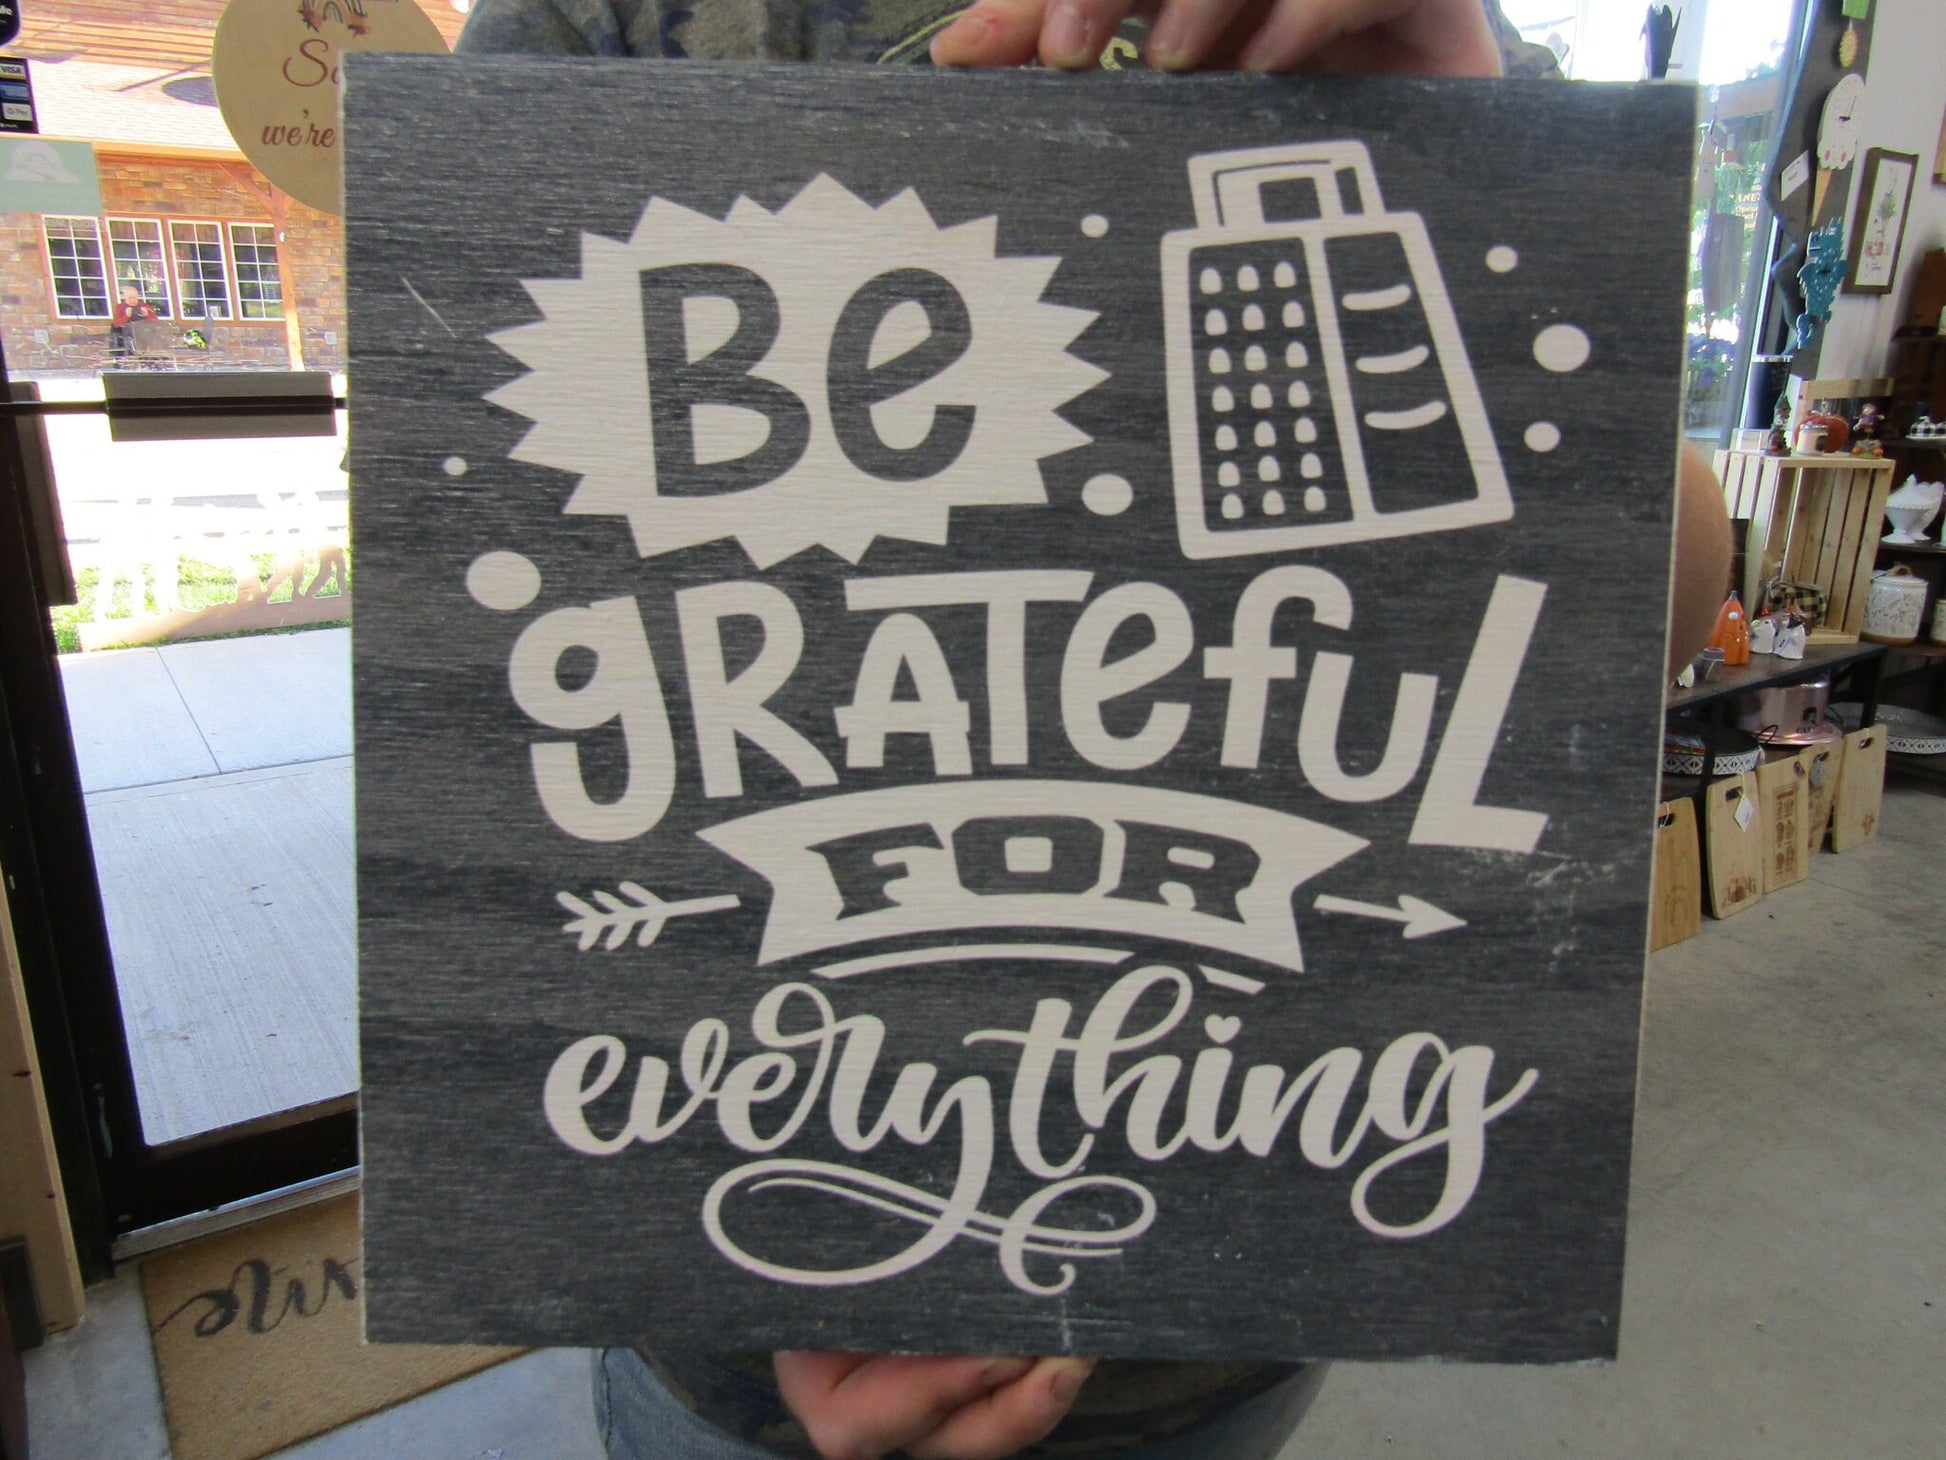 Be Grateful For Everything Cheesey Cheese Grater Kitchen Decor Unframed Printed Punny Joke Funny Contemporary Rustic Farmhouse Handmade